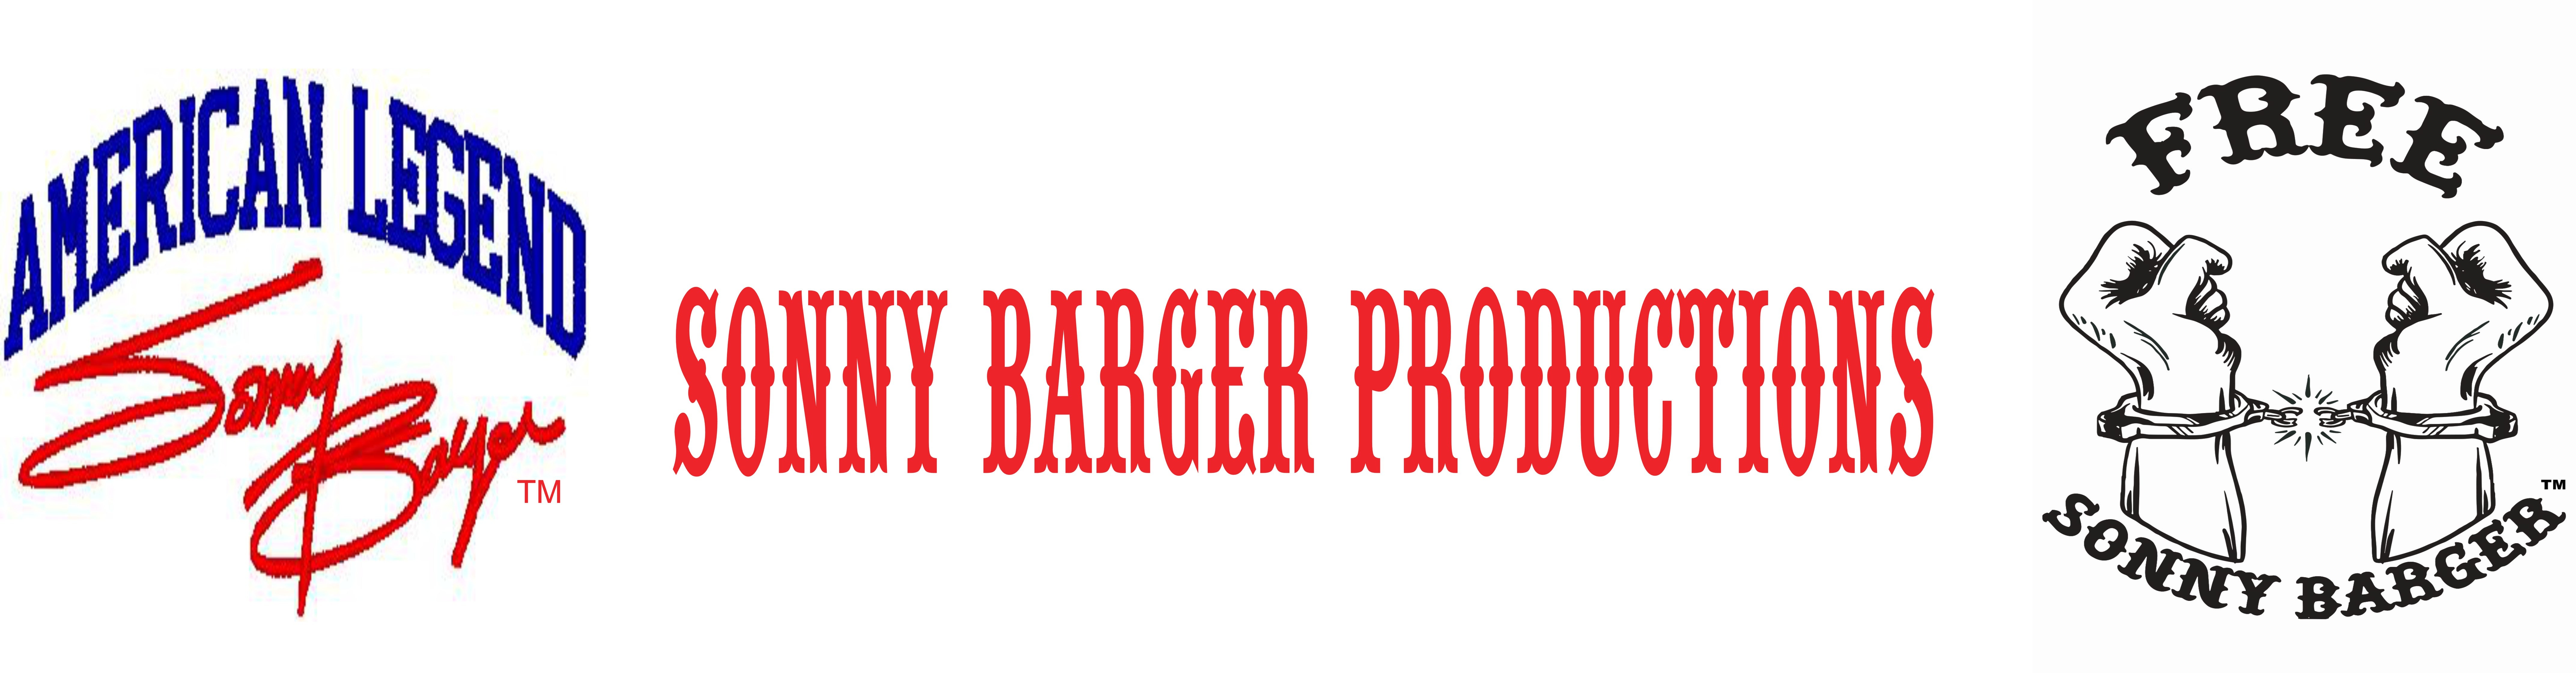 Sonny Barger Productions